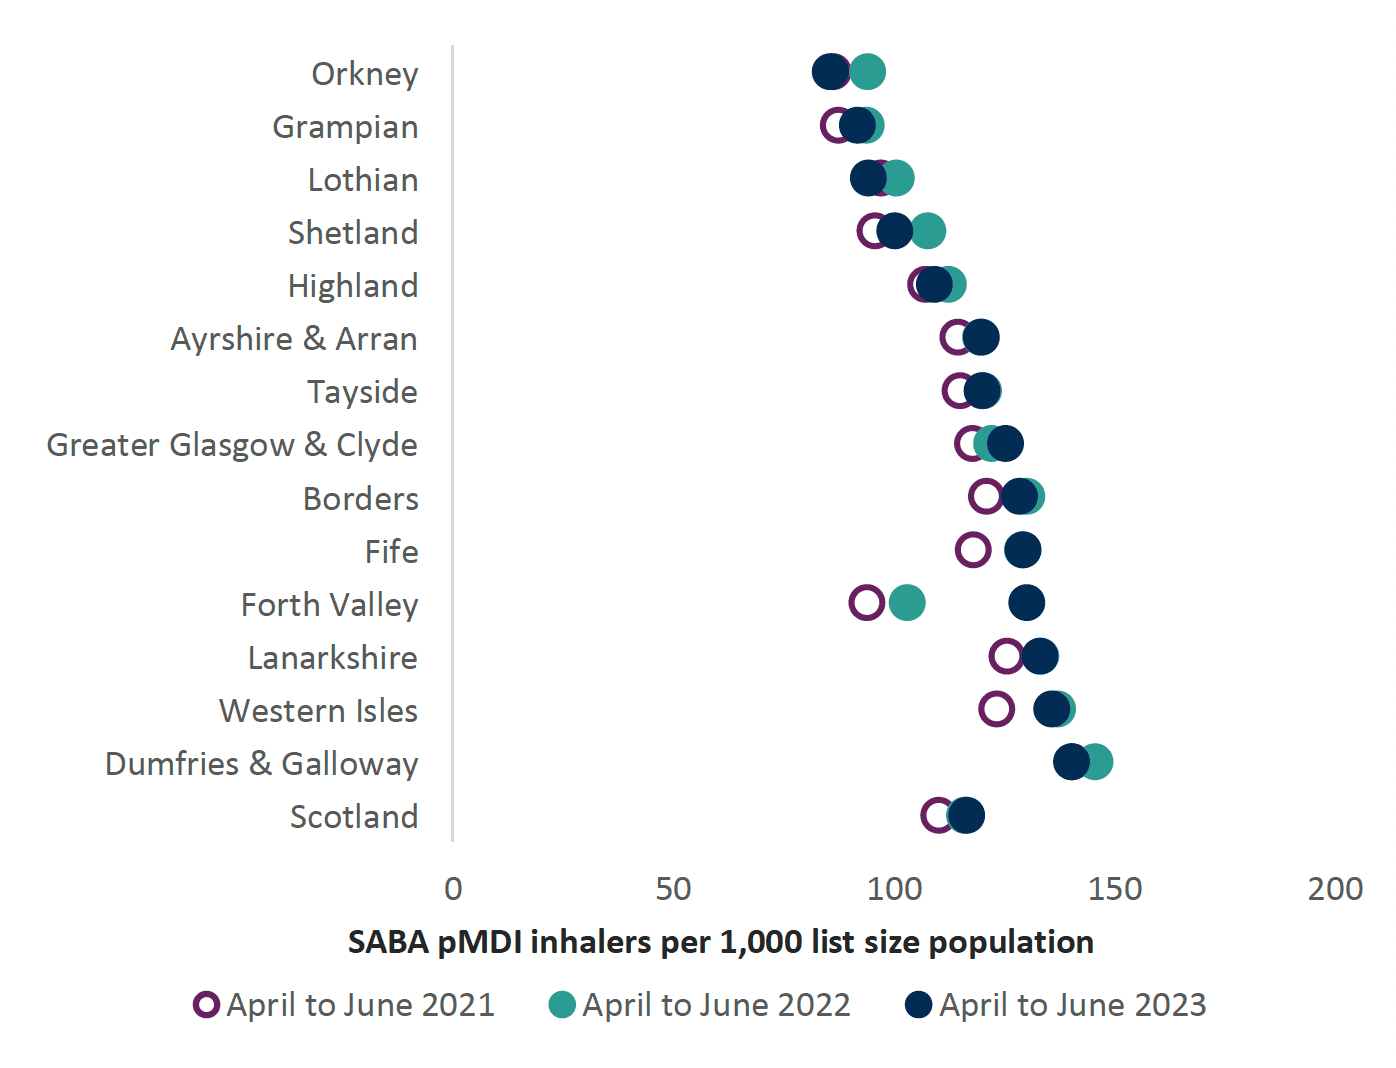 Chart showing number of SABA pMDI inhalers prescribed per 1,000 list size compared between health boards and Scotland in 2021, 2022 and 2023. Overall Scotland trend is increasing